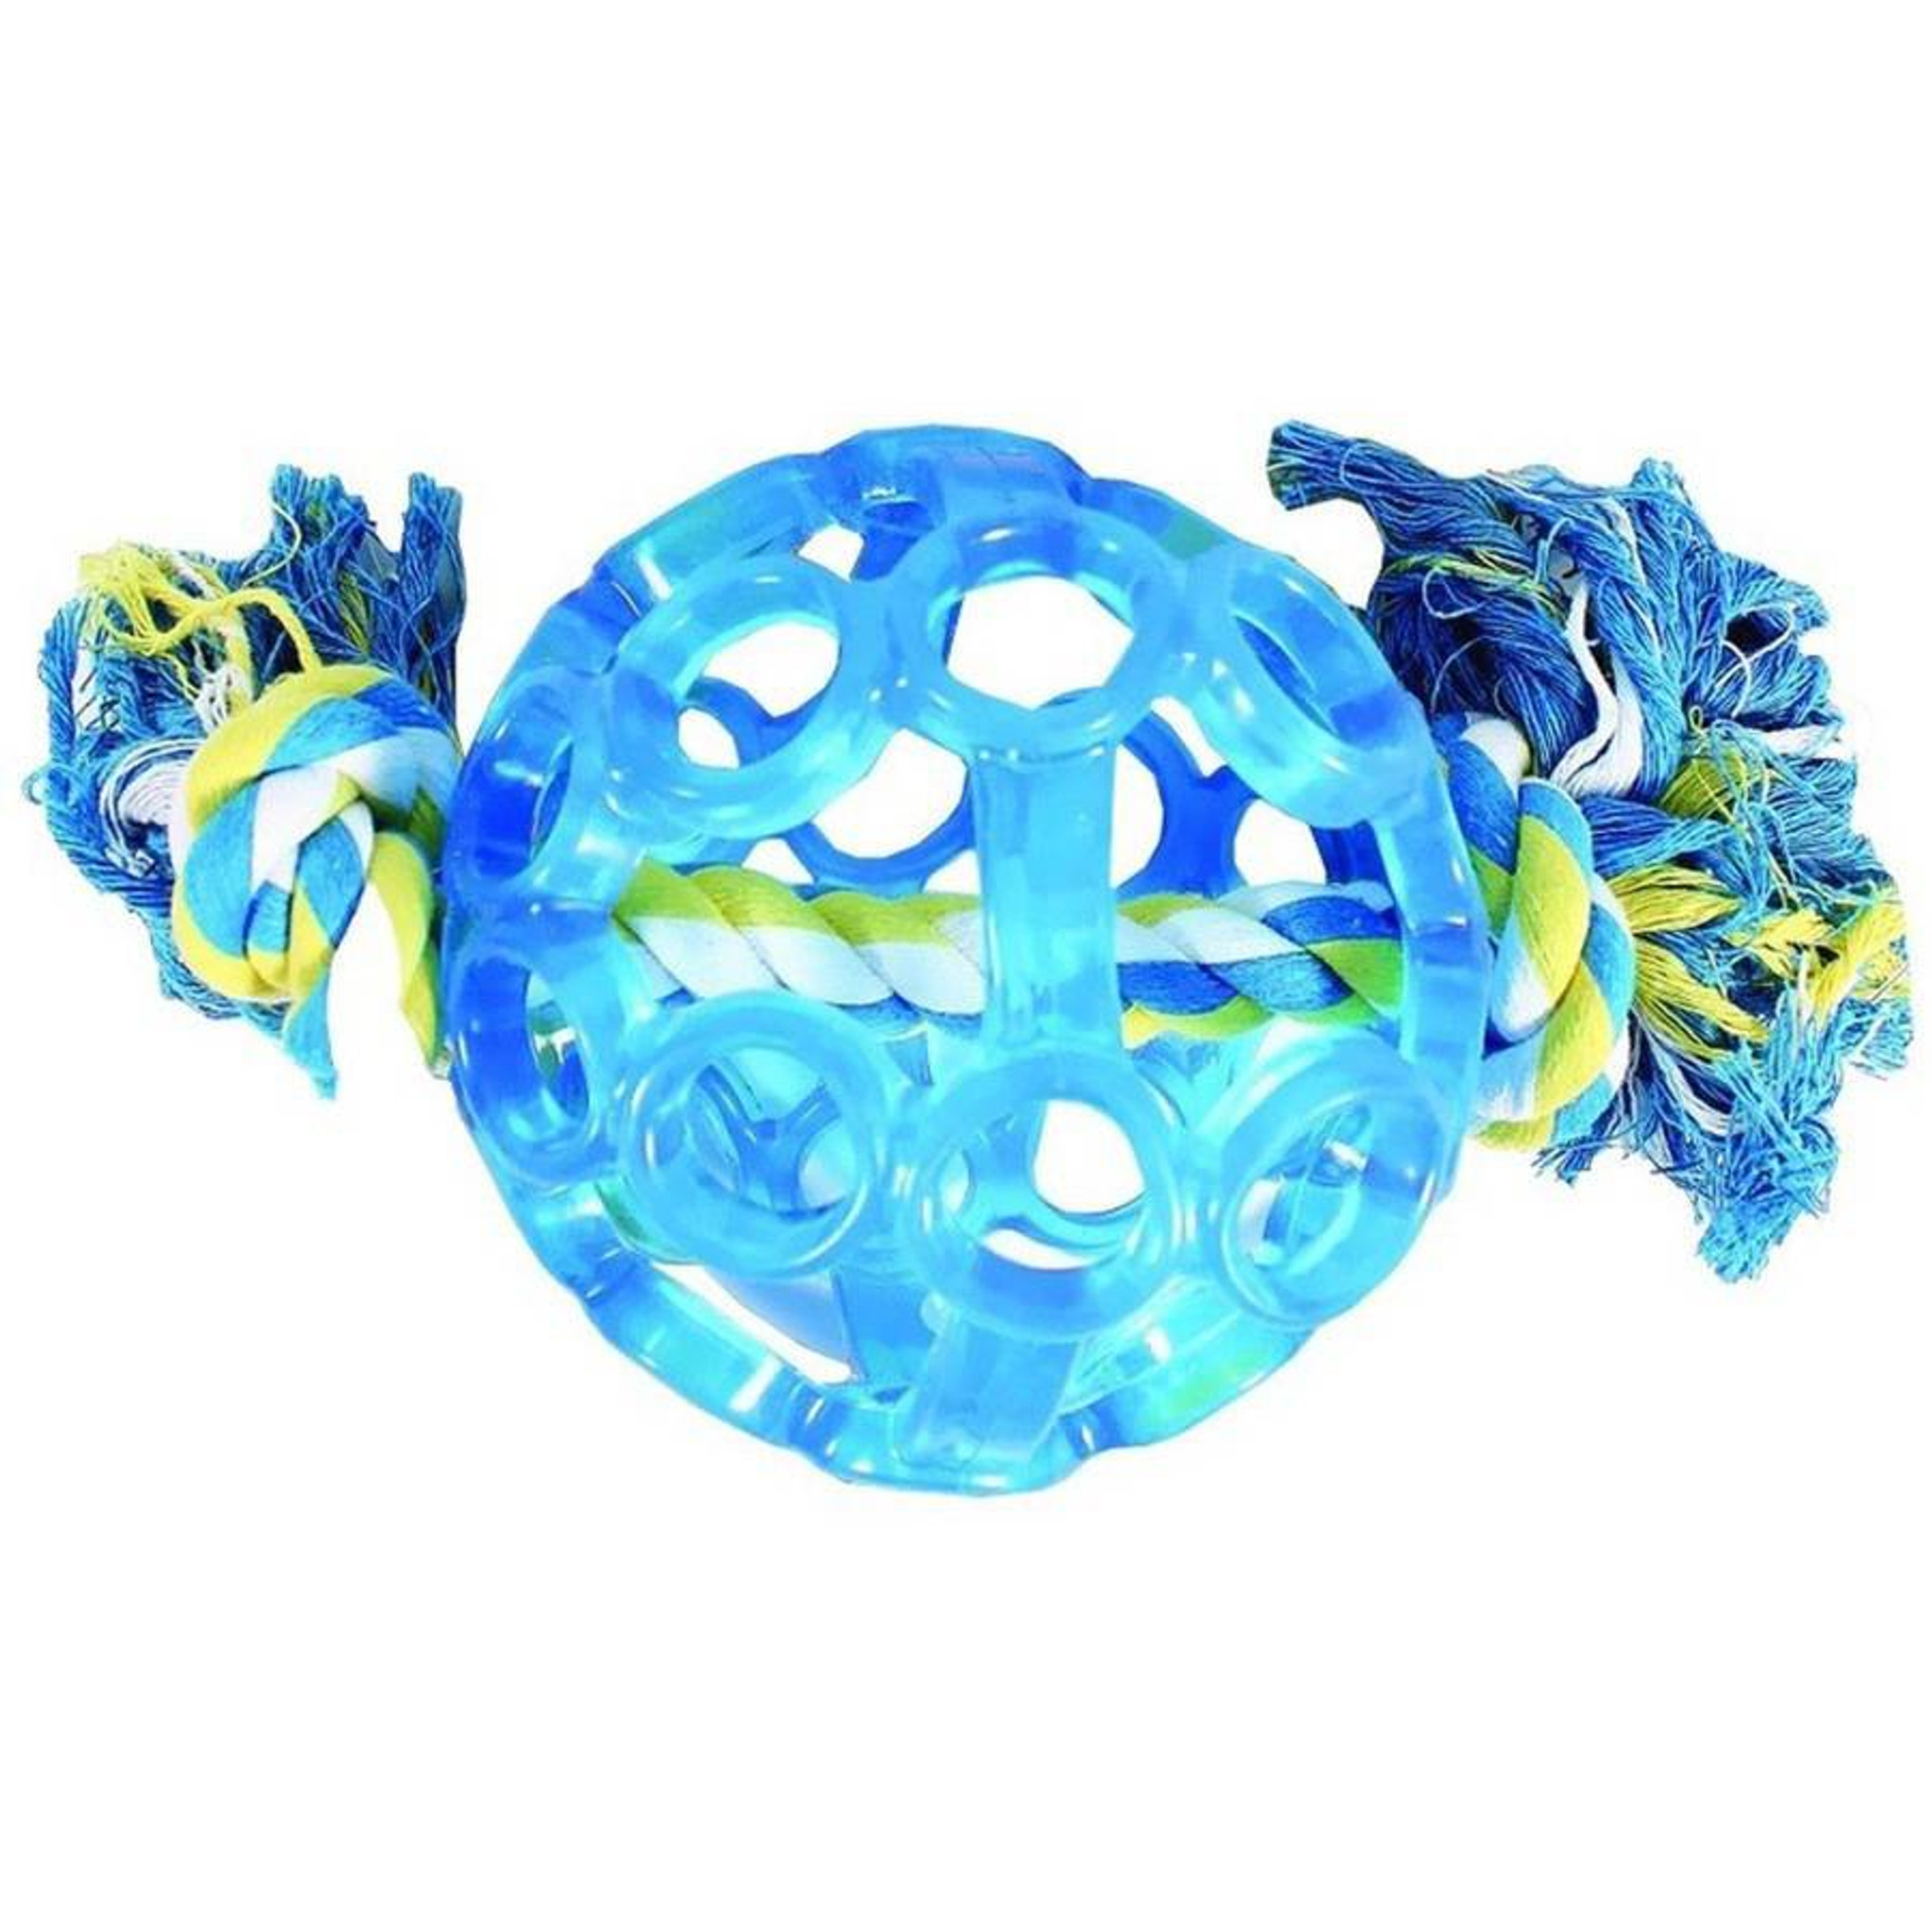 JW Pet Hol-ee Football Dog Chew Puzzle Toy, Mini, assorted colors.